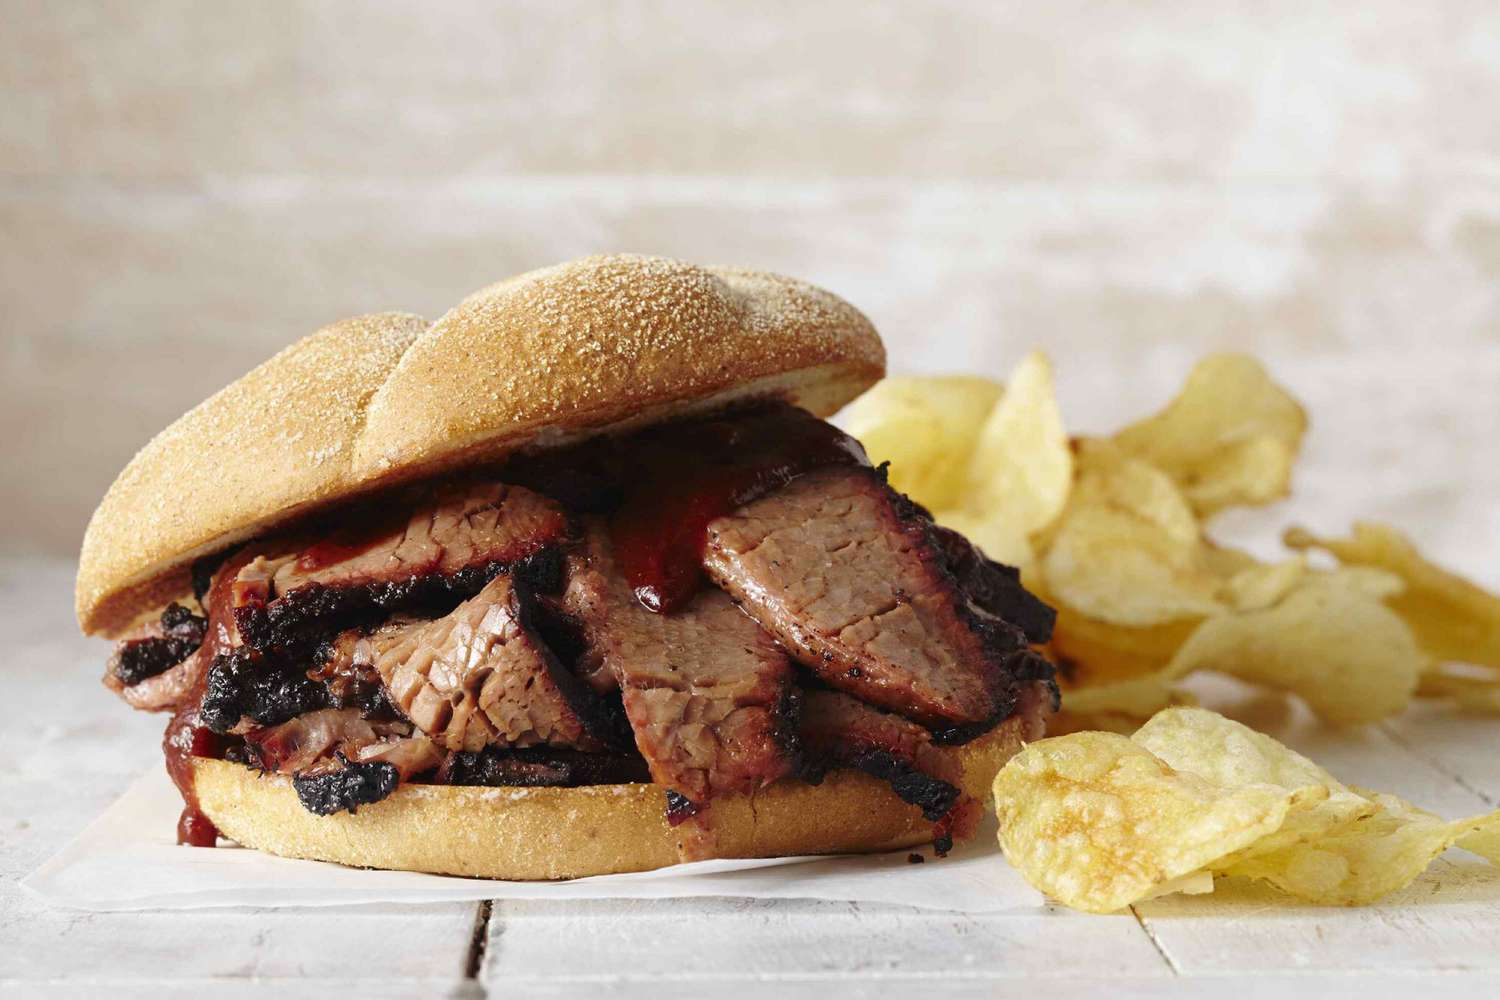 beef brisket on sandwich with chips